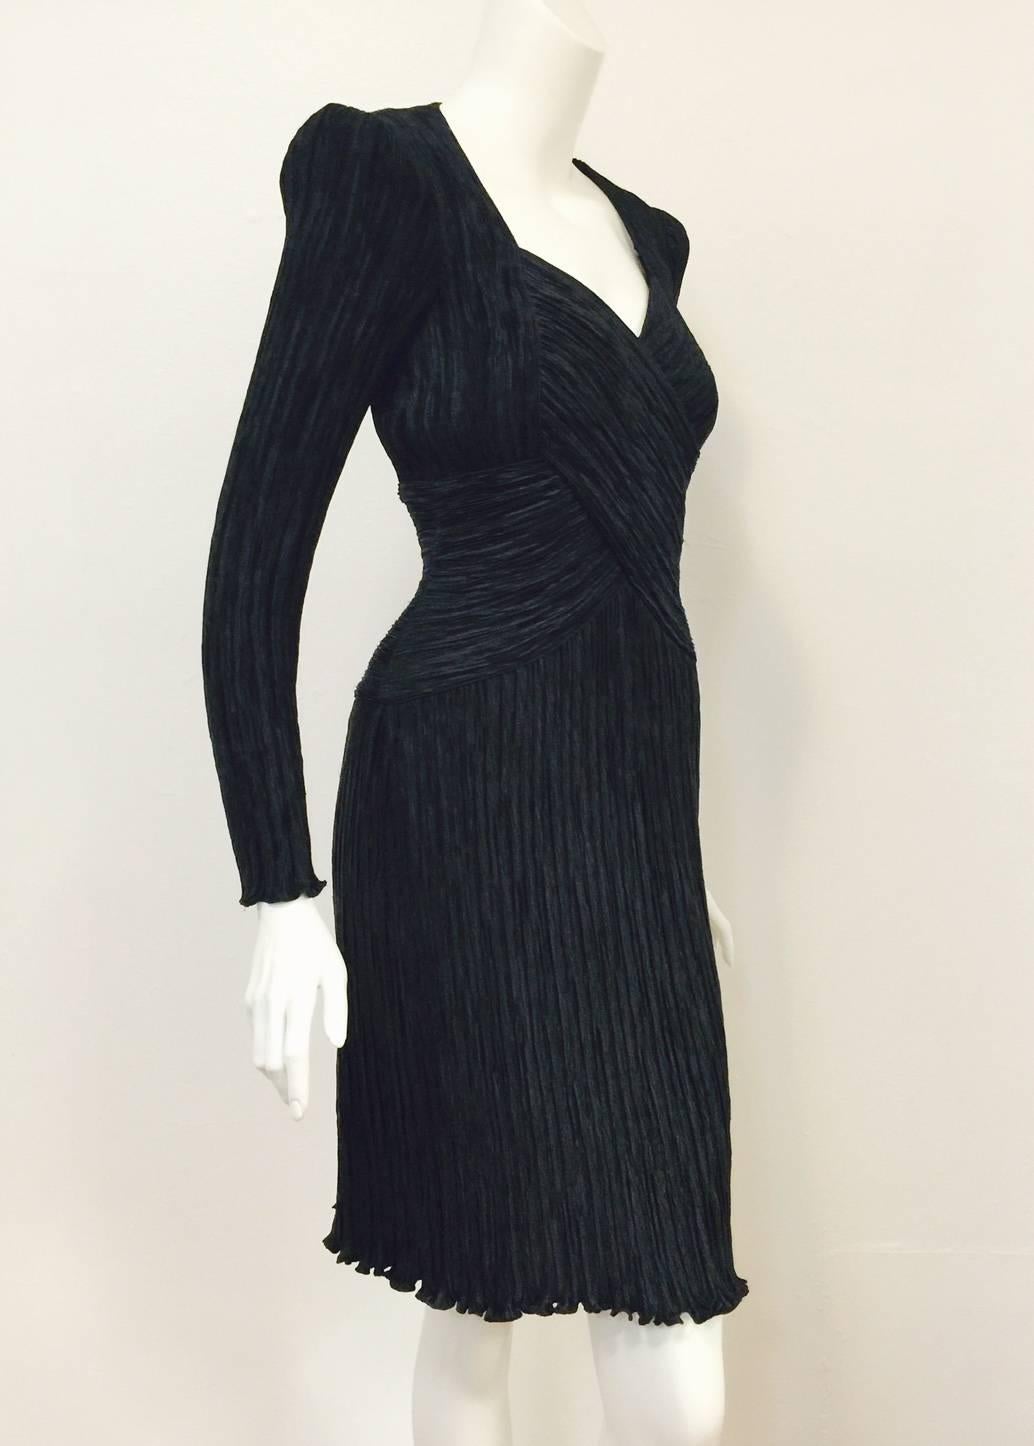 Vintage Black Cocktail Dress is a must for any connoisseur of Mary McFadden Couture!  Not your typical 